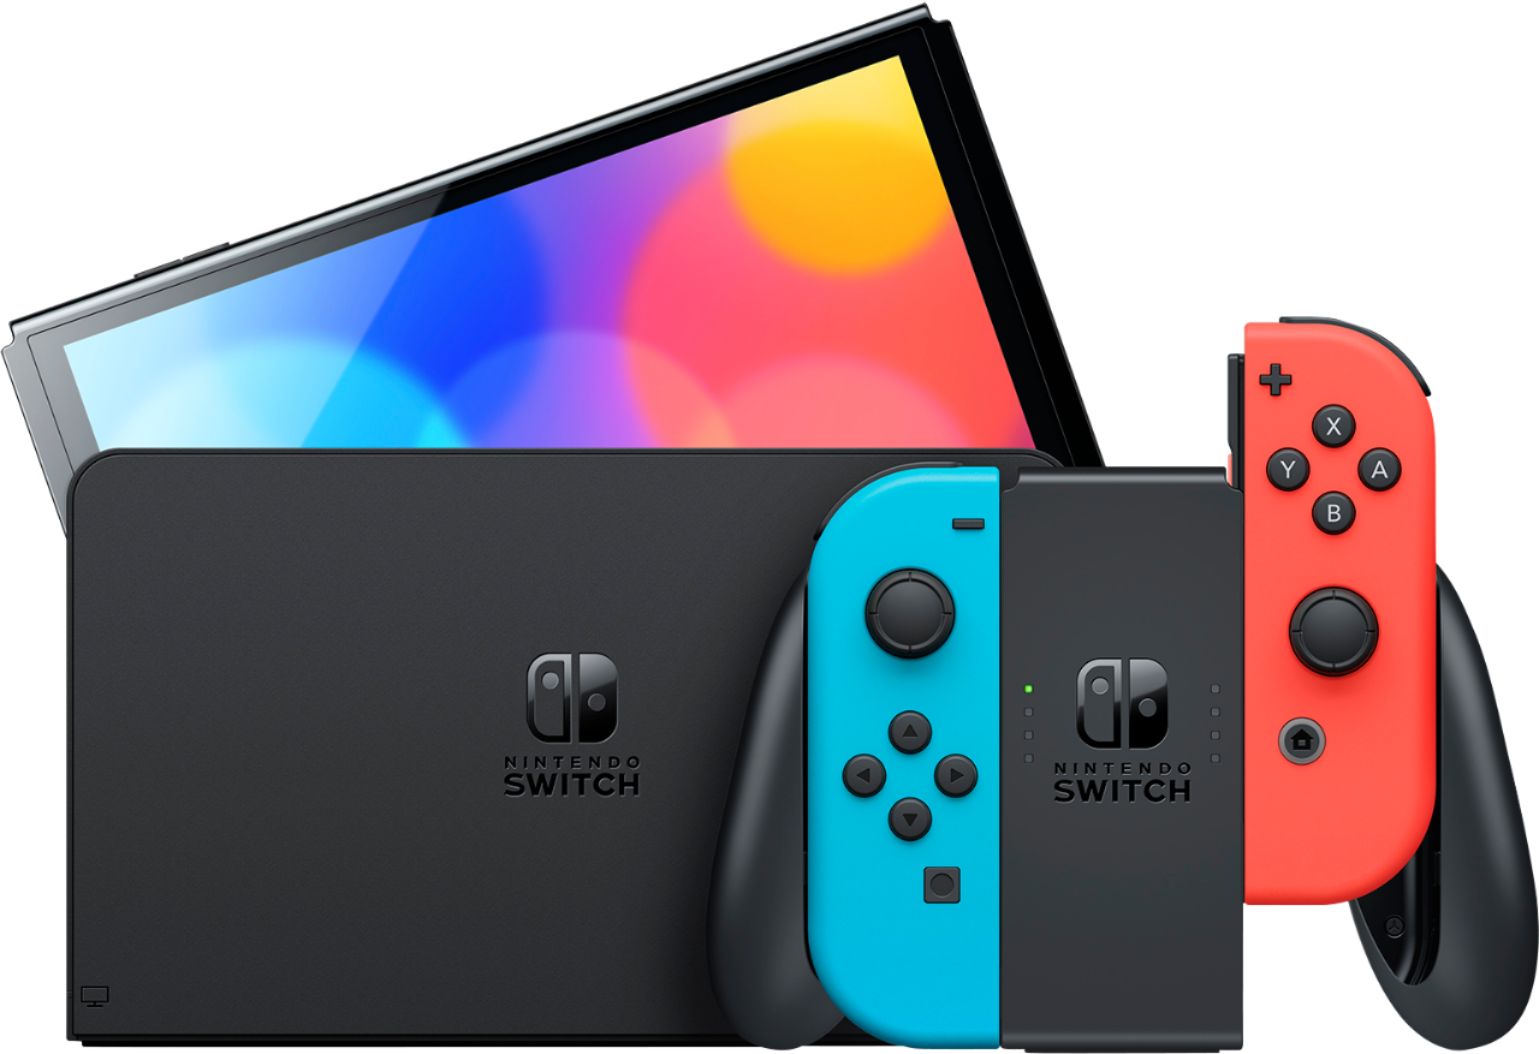 2022 New Nintendo Switch OLED Model Neon Red Blue Joy Con 64GB Console Improved HD Screen & LAN-Port Dock with Pokemon Shining Pearl, Mytrix 128GB MicroSD Card and Accessories